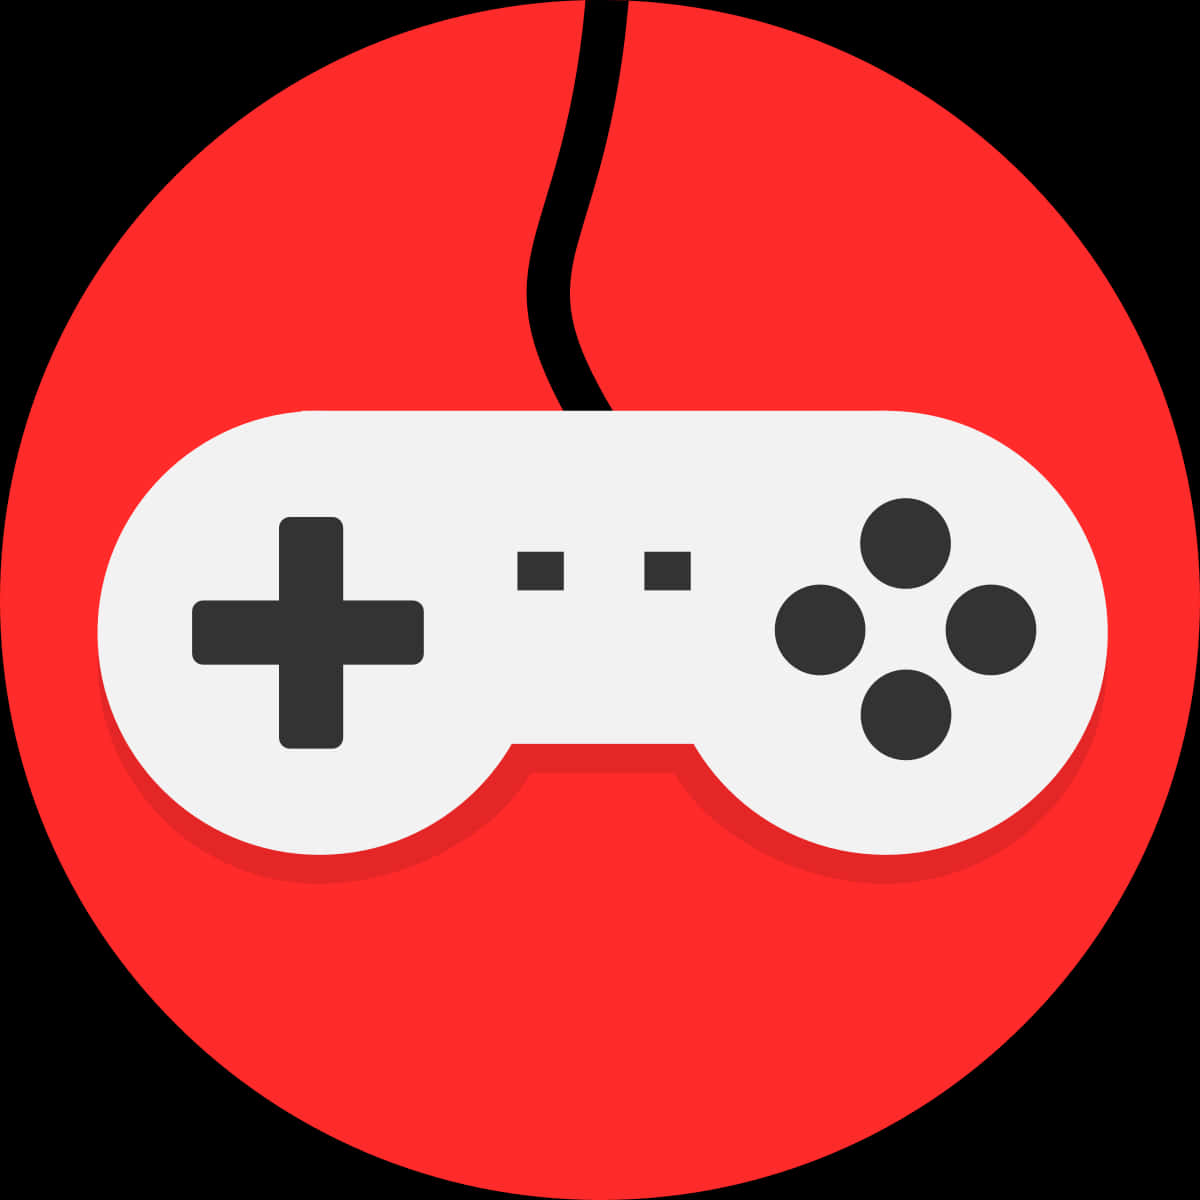 Game Controller Icon PNG image